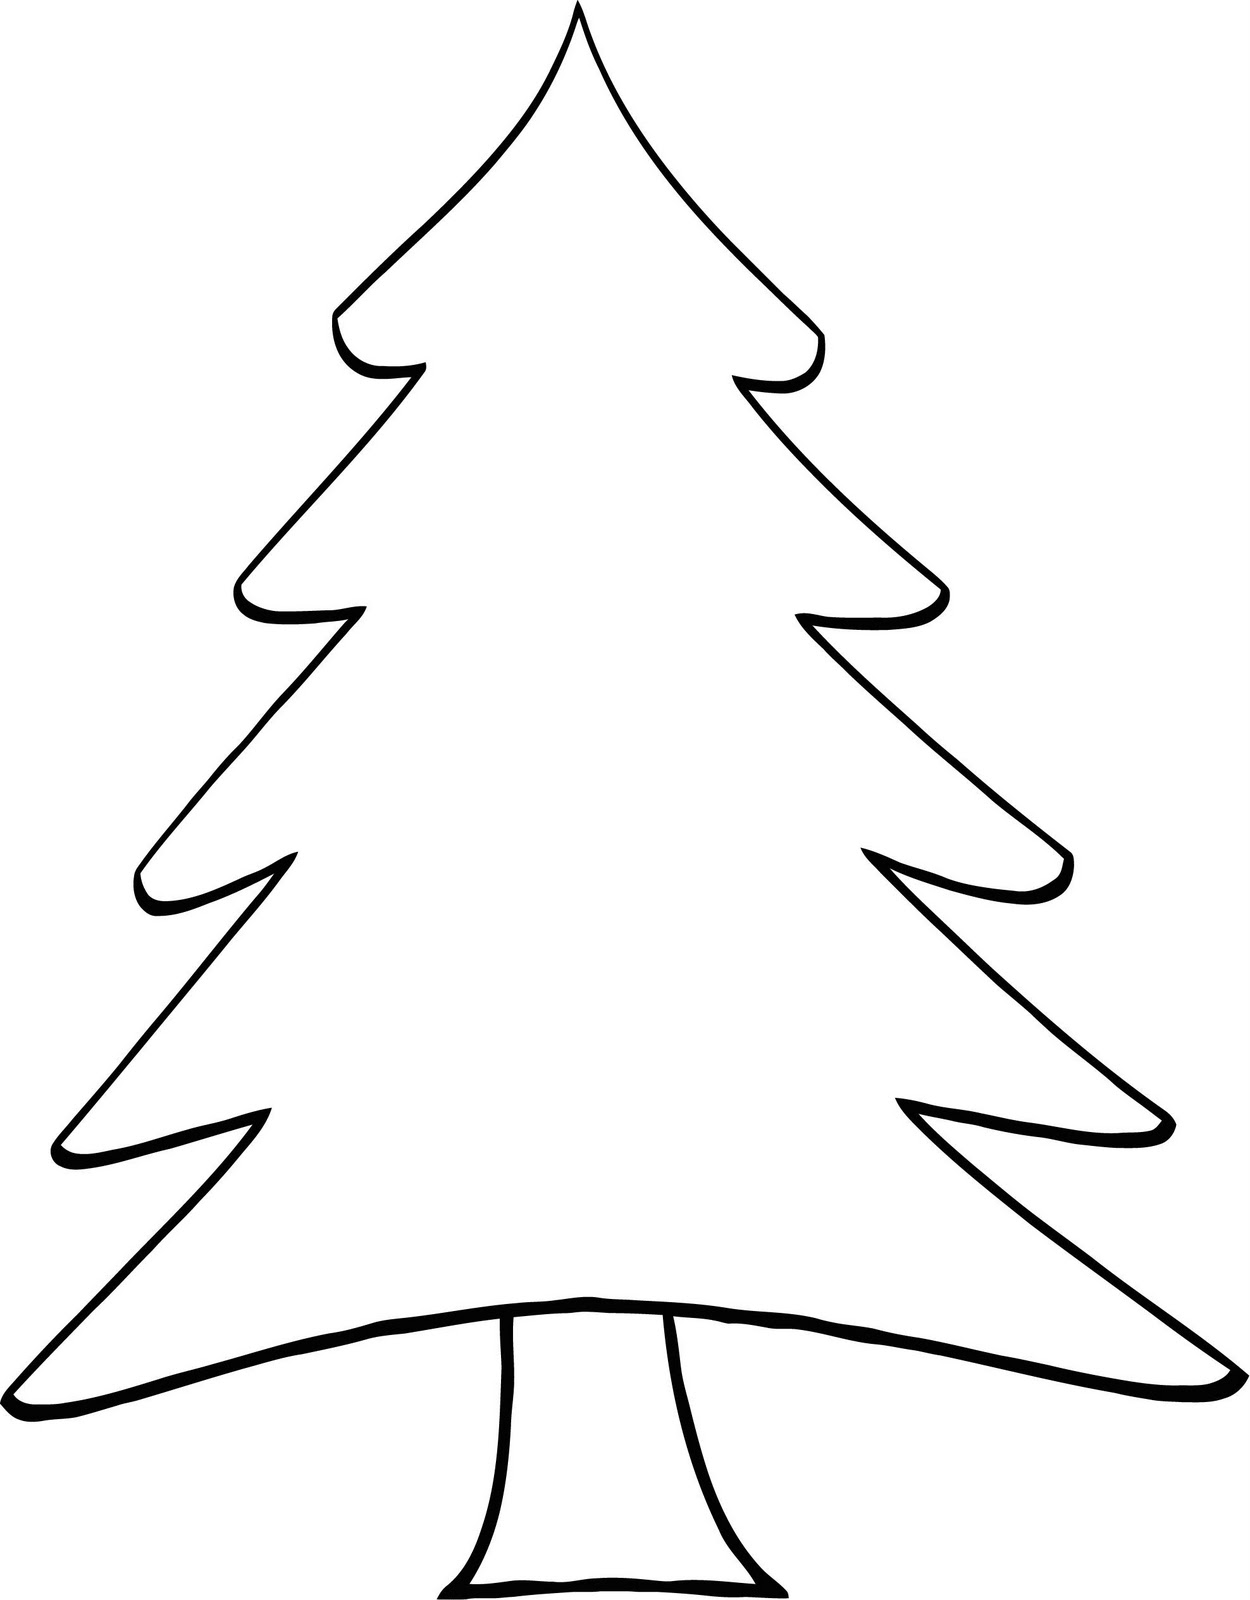 Free Tree Patterns for Crafts, Stencils, and More